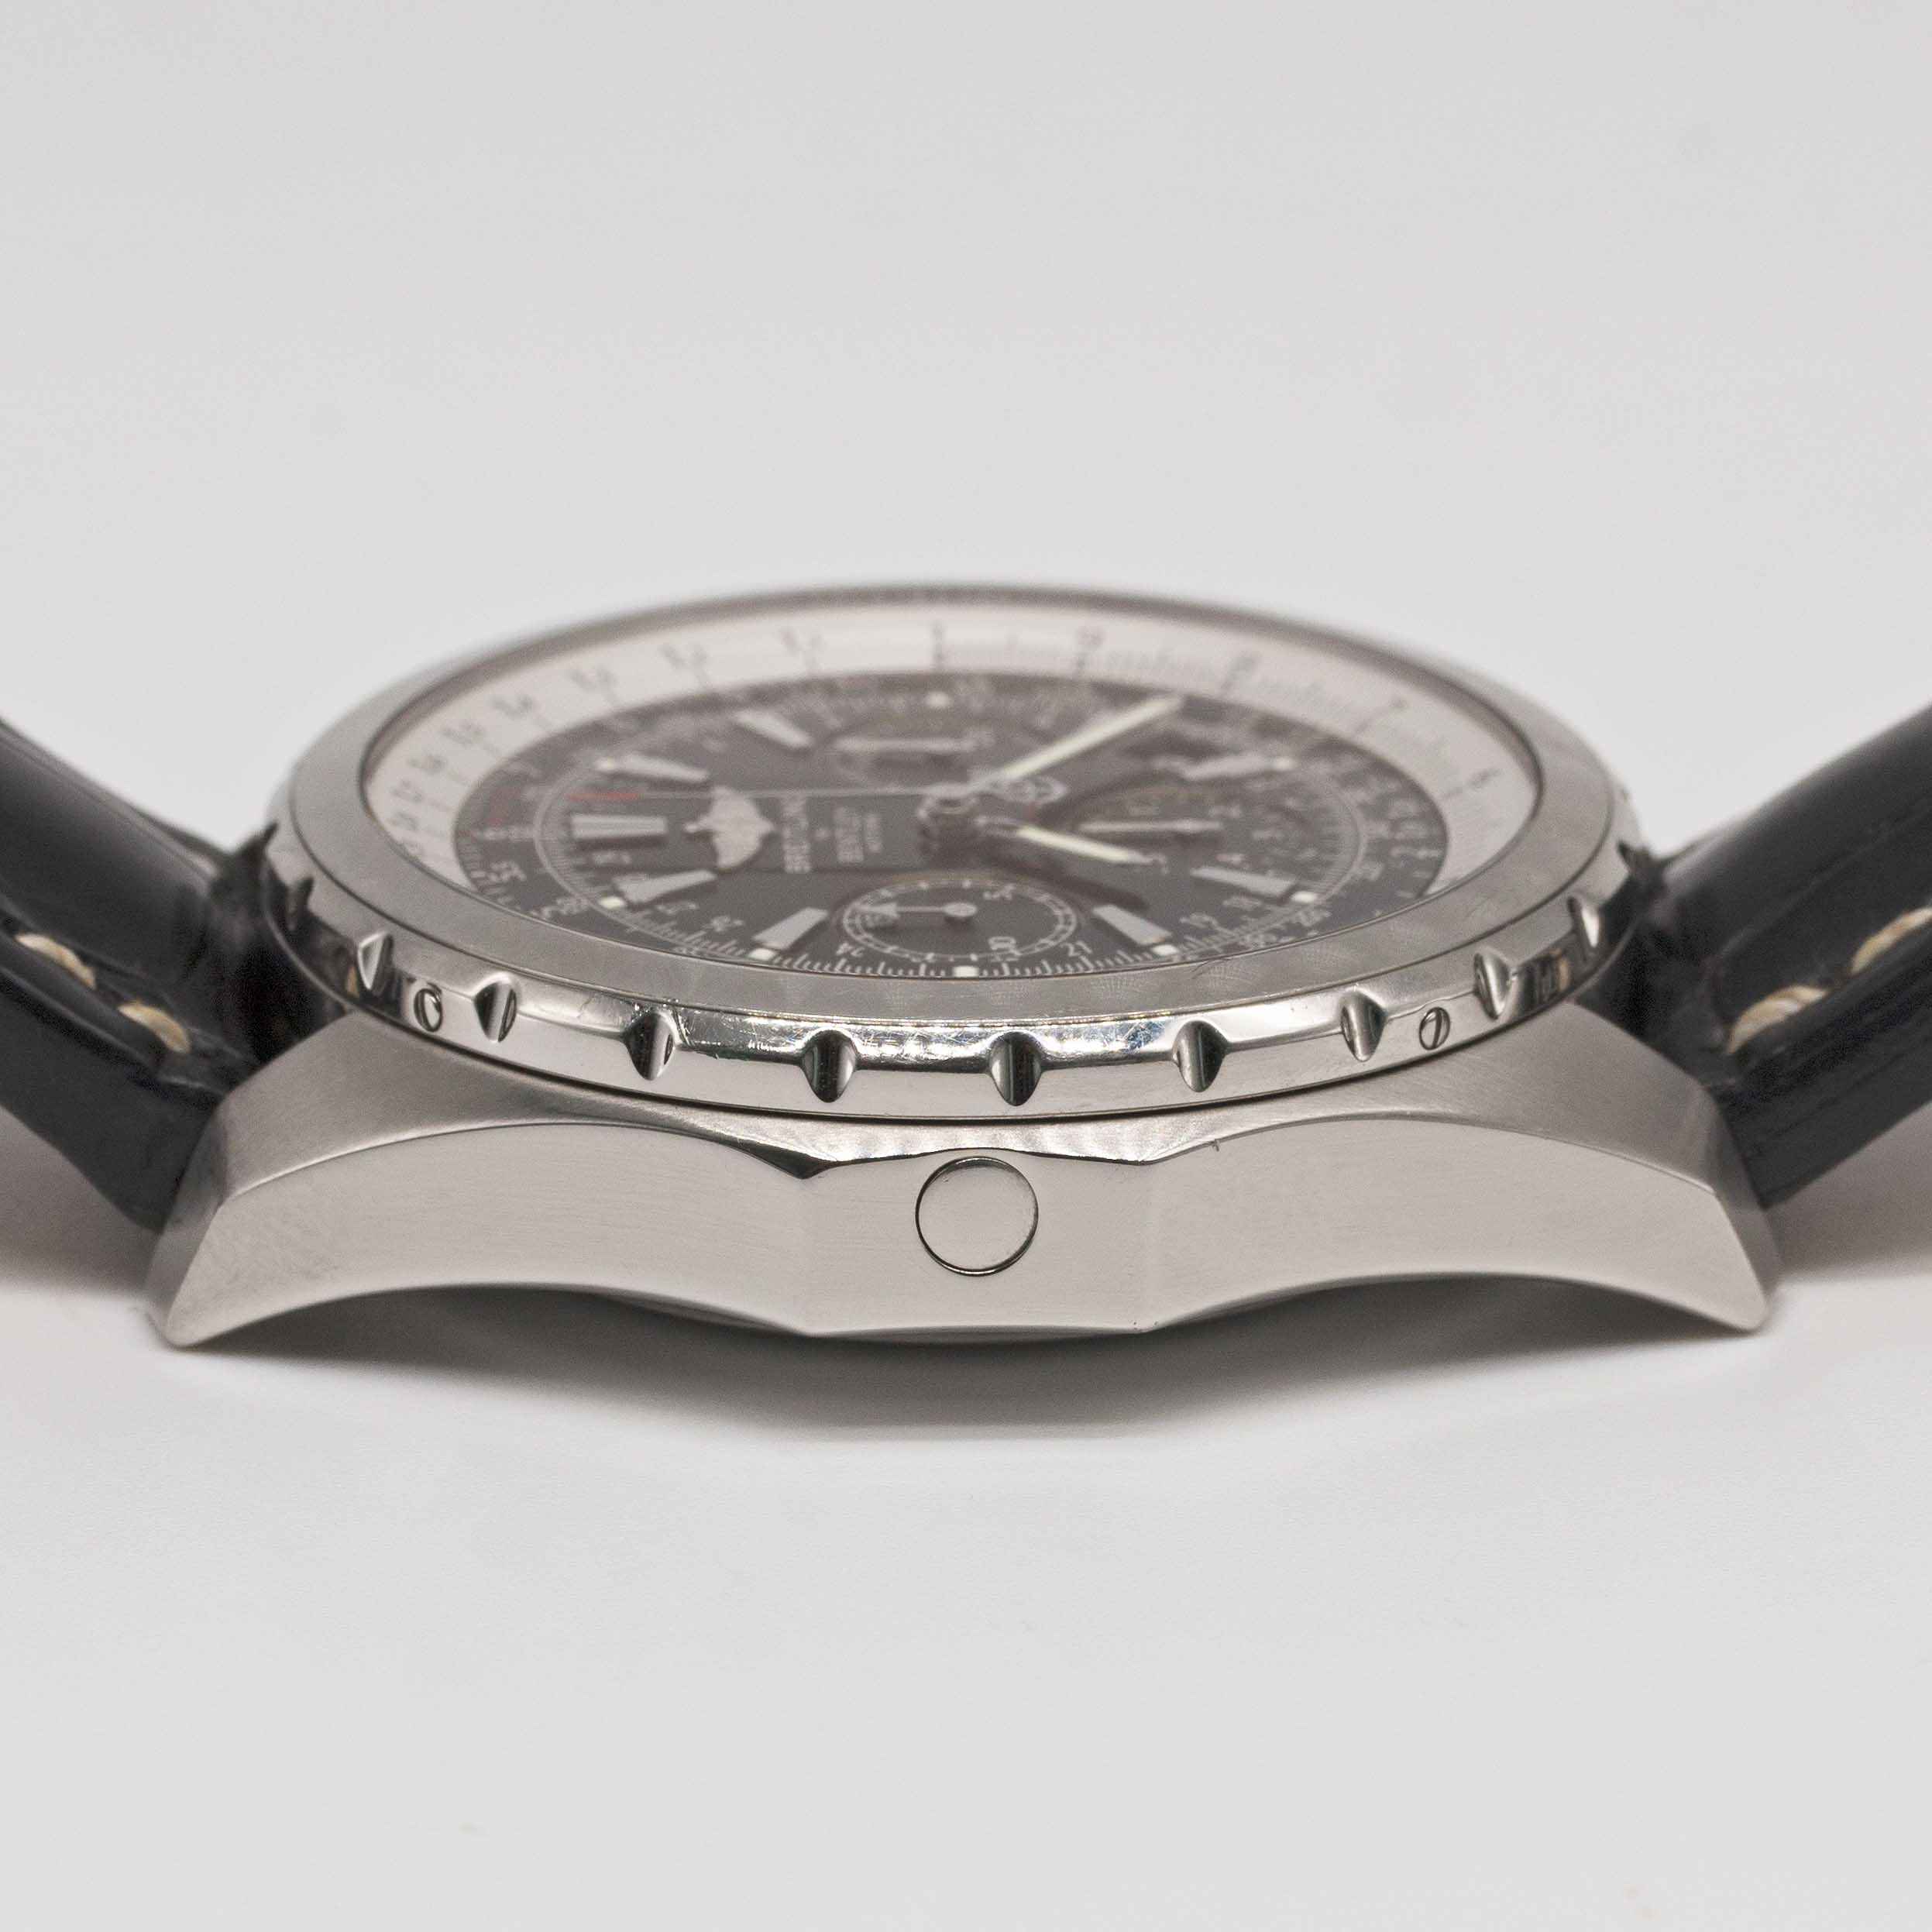 A STAINLESS STEEL BREITLING BENTLEY MOTORS T CHRONOGRAPH WRIST WATCH CIRCA 2007, REF. A25363 WITH - Image 8 of 9